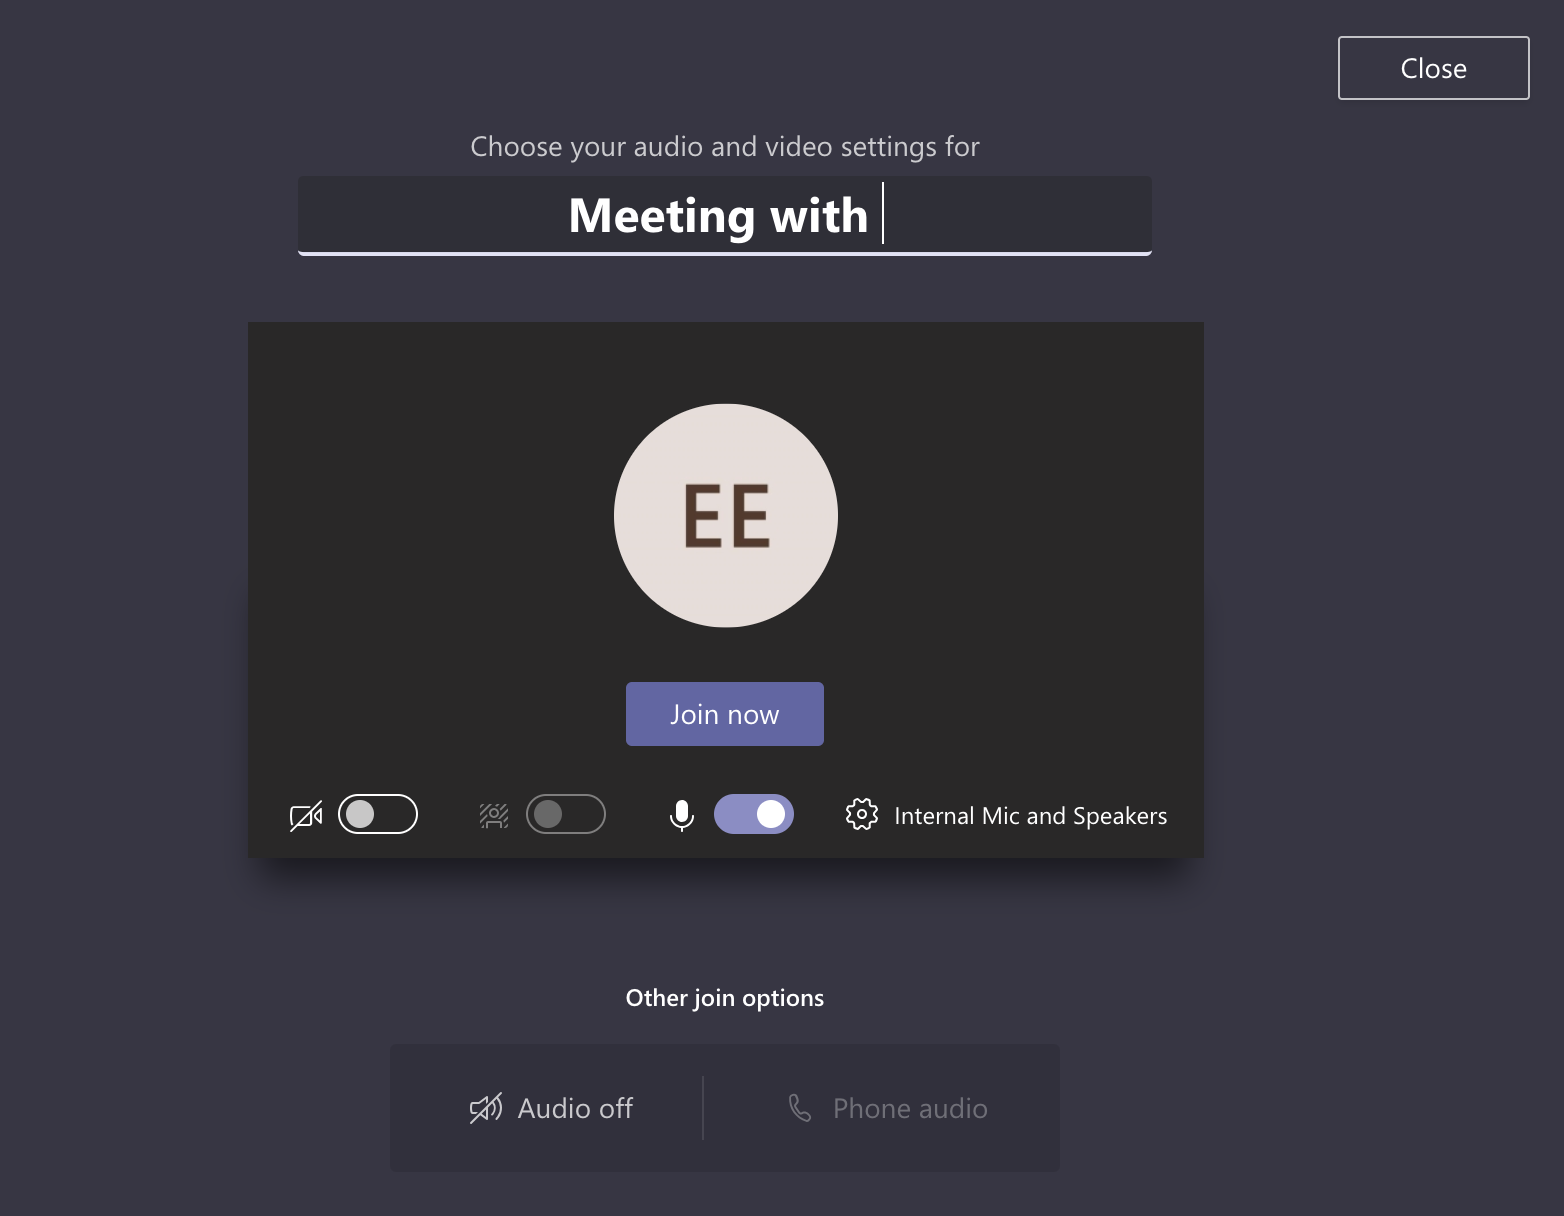 Meeting screen with joining options displayed at bottom